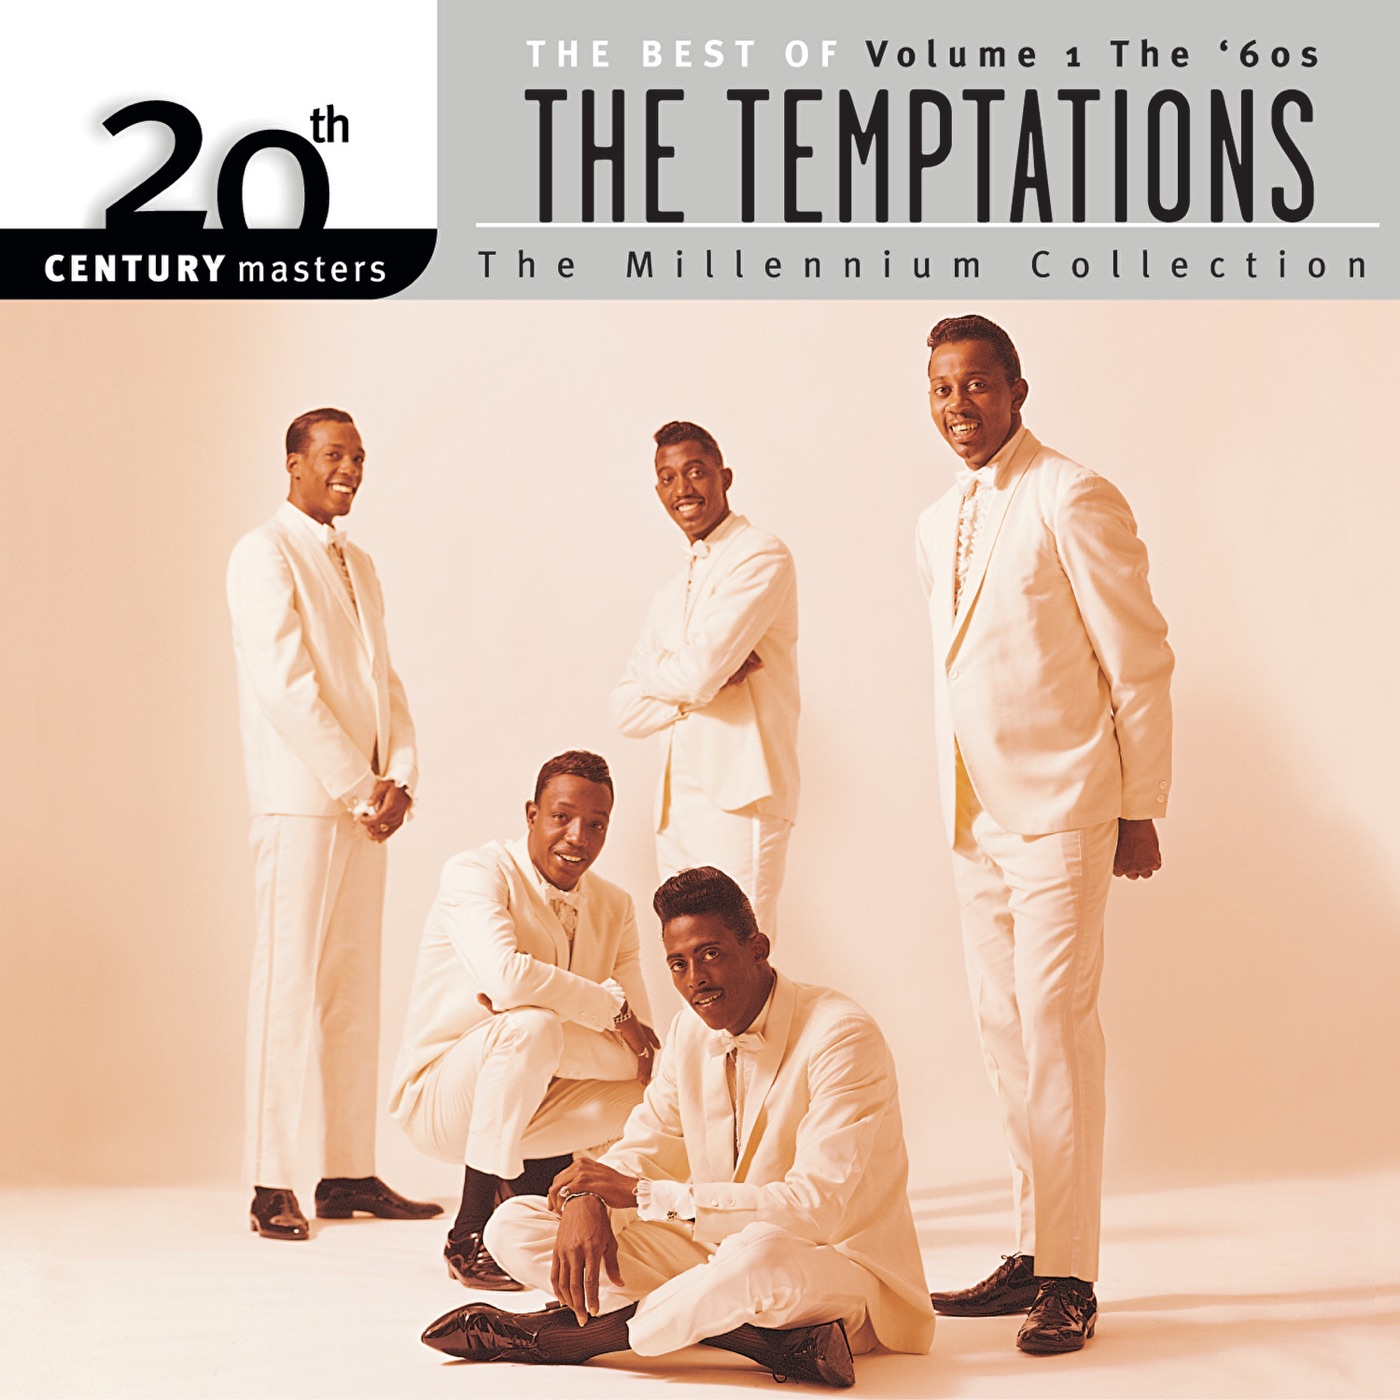 20th Century Masters: The Millennium Collection: Best Of The Temptations, Vol. 1 - The '60s by The Temptations